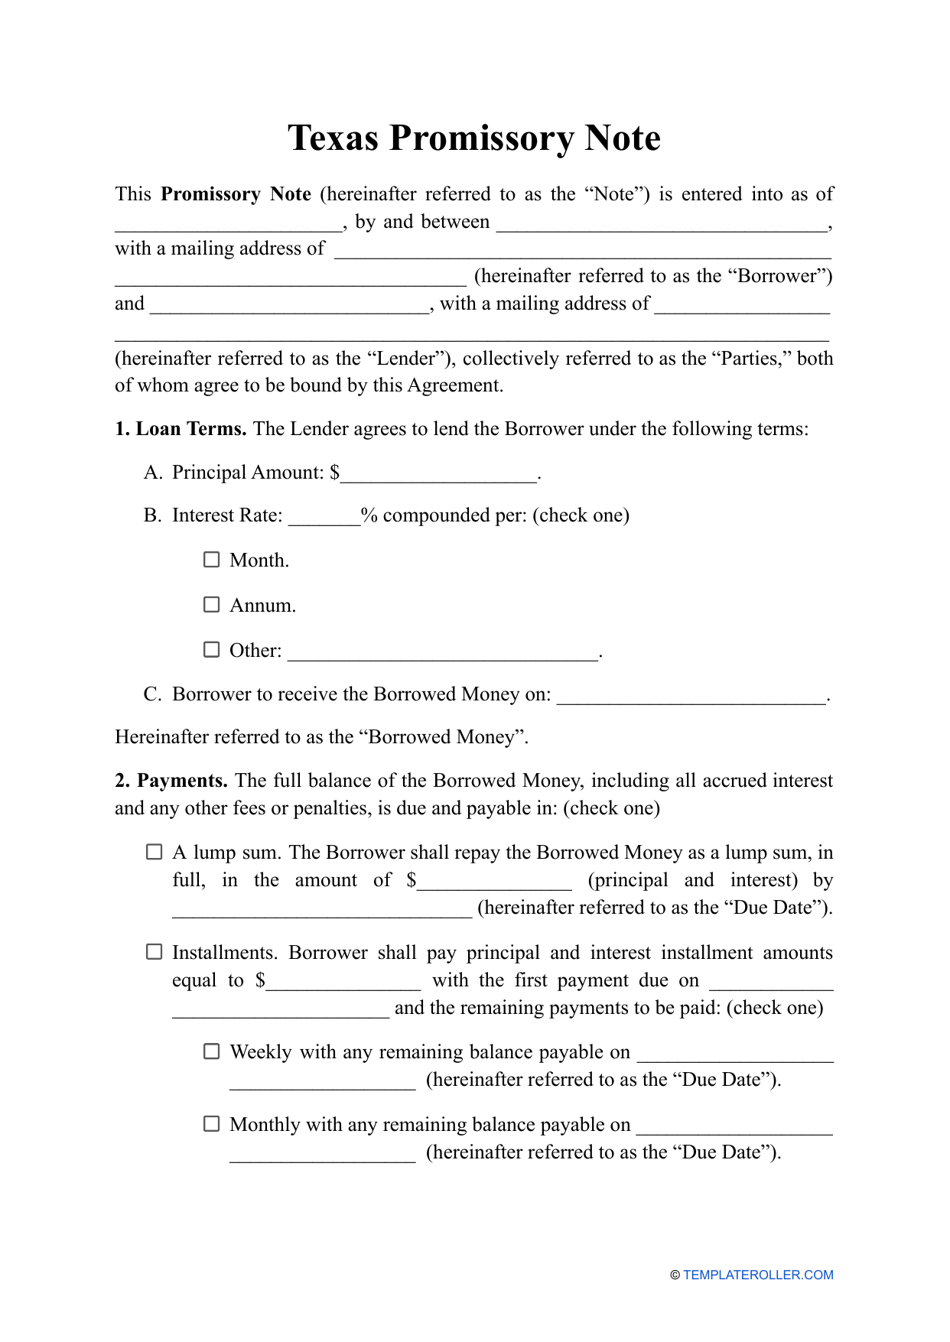 Texas Promissory Note Template Fill Out Sign Online and Download PDF